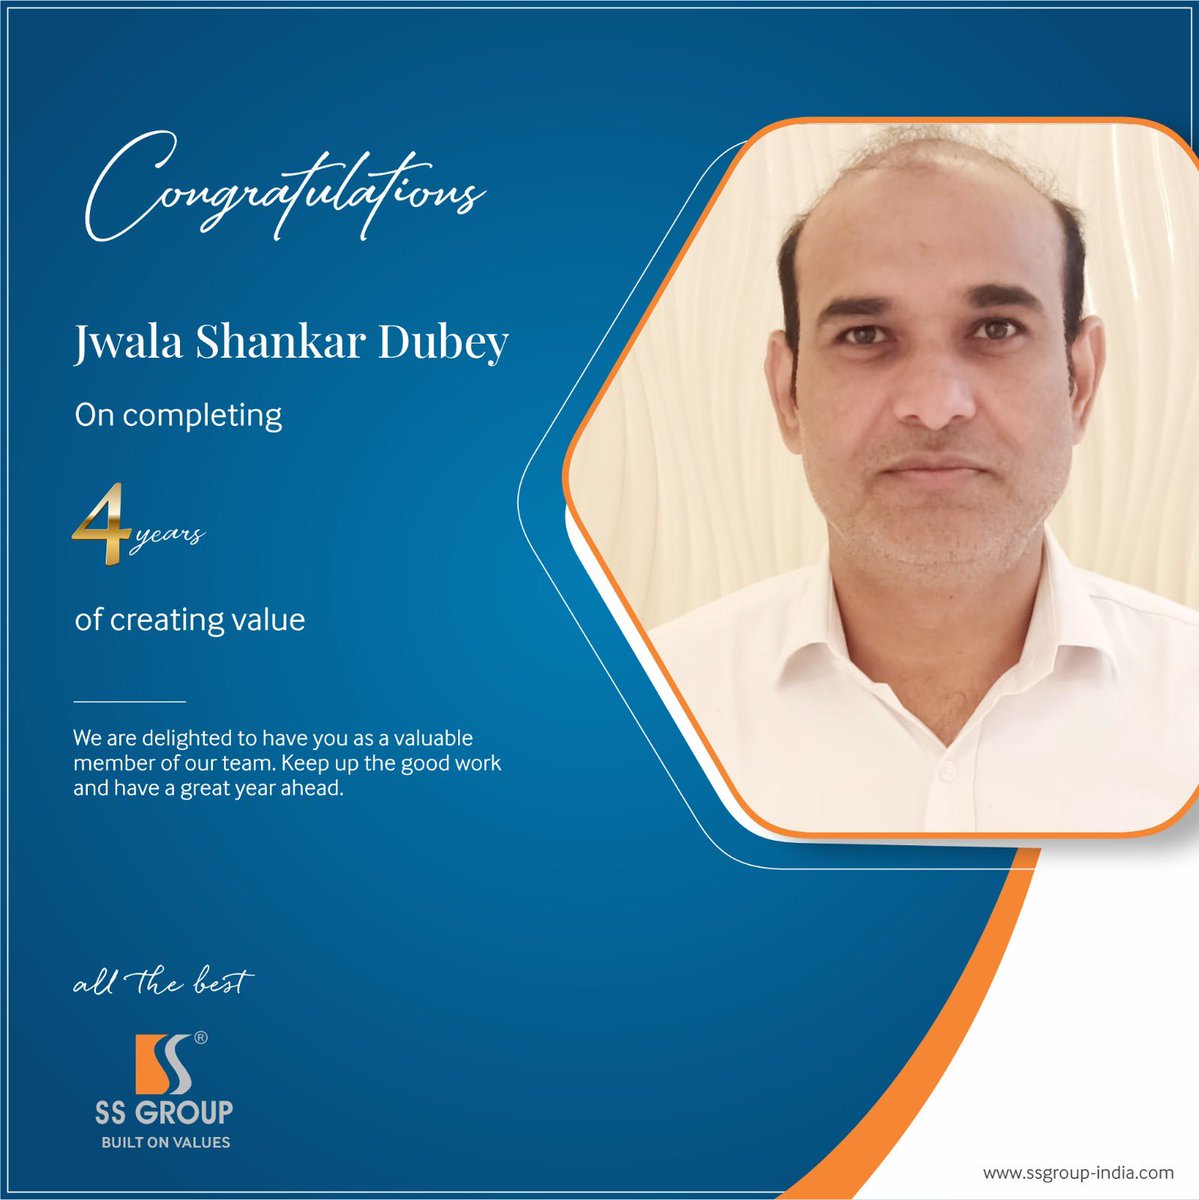 This Day, That Year..!!

Congratulations Jwala Shankar Dubey on your 4th Work Anniversary! We appreciate all these years of #dedication, #hardwork, & #commitment.
We wish you all the best & look forward to see your continued #success with us.

#SSGroup #workanniversary #workplace